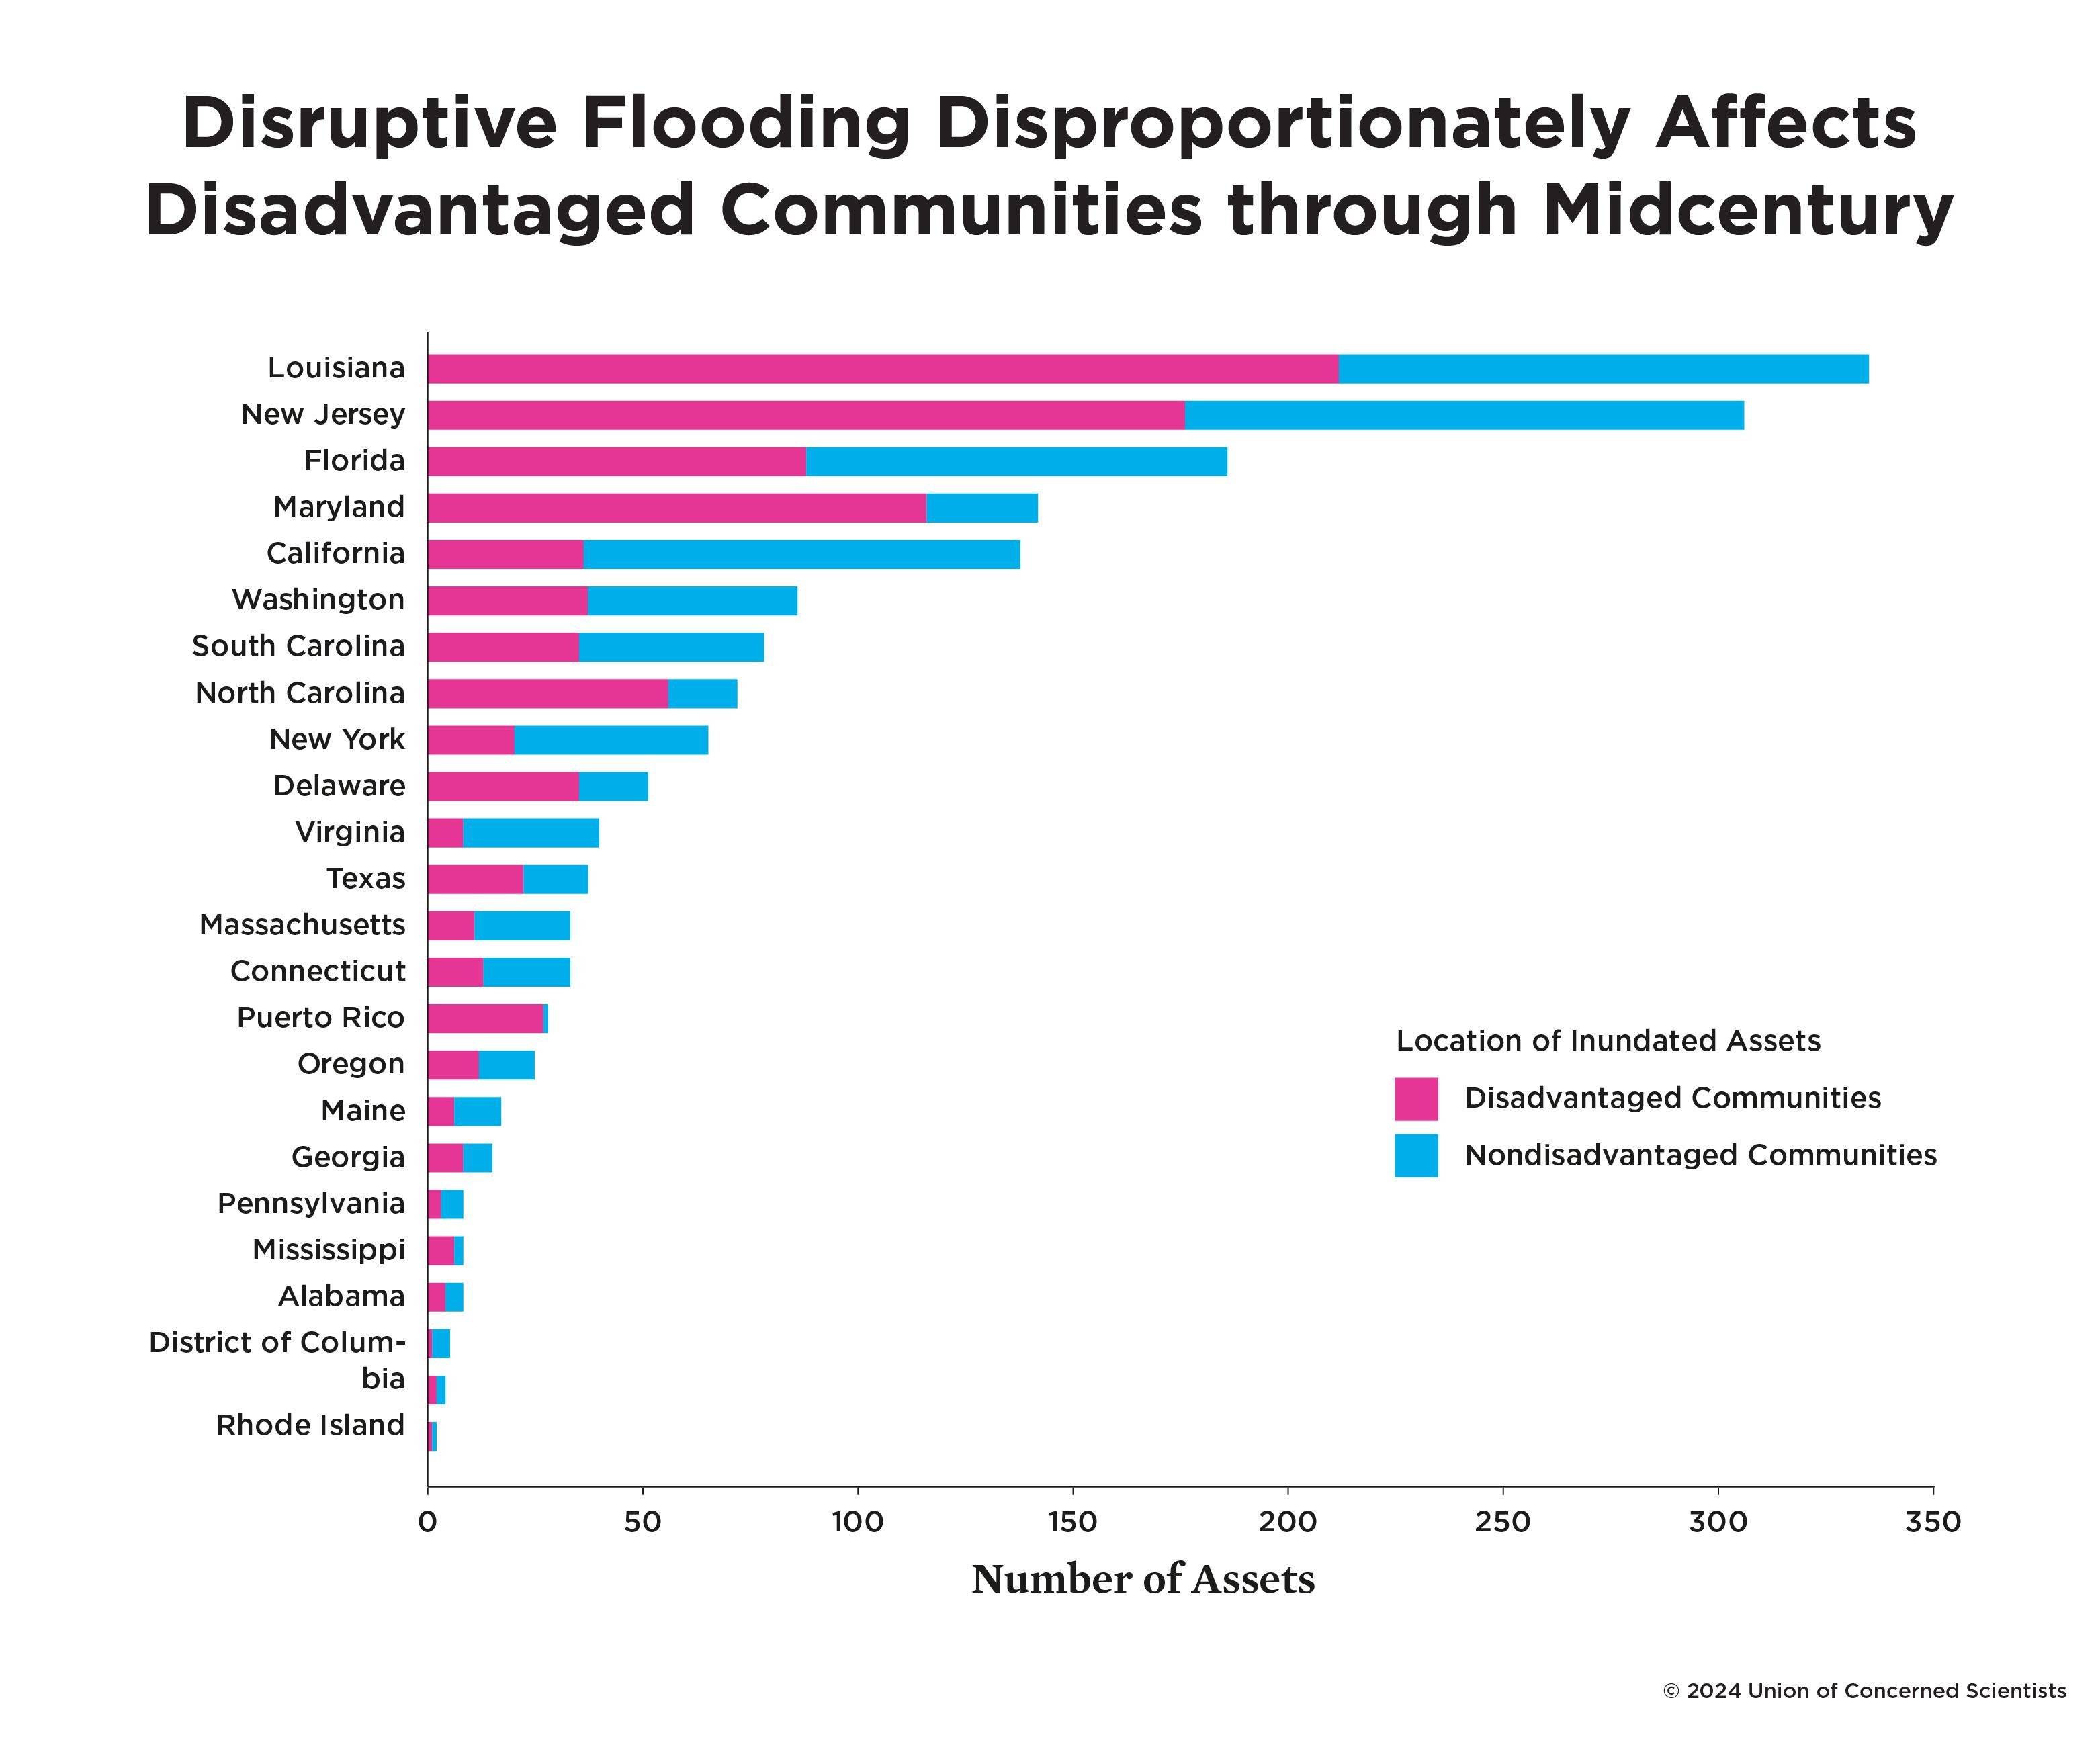 Bar chart showing flooding disproportionately affects disadvantaged